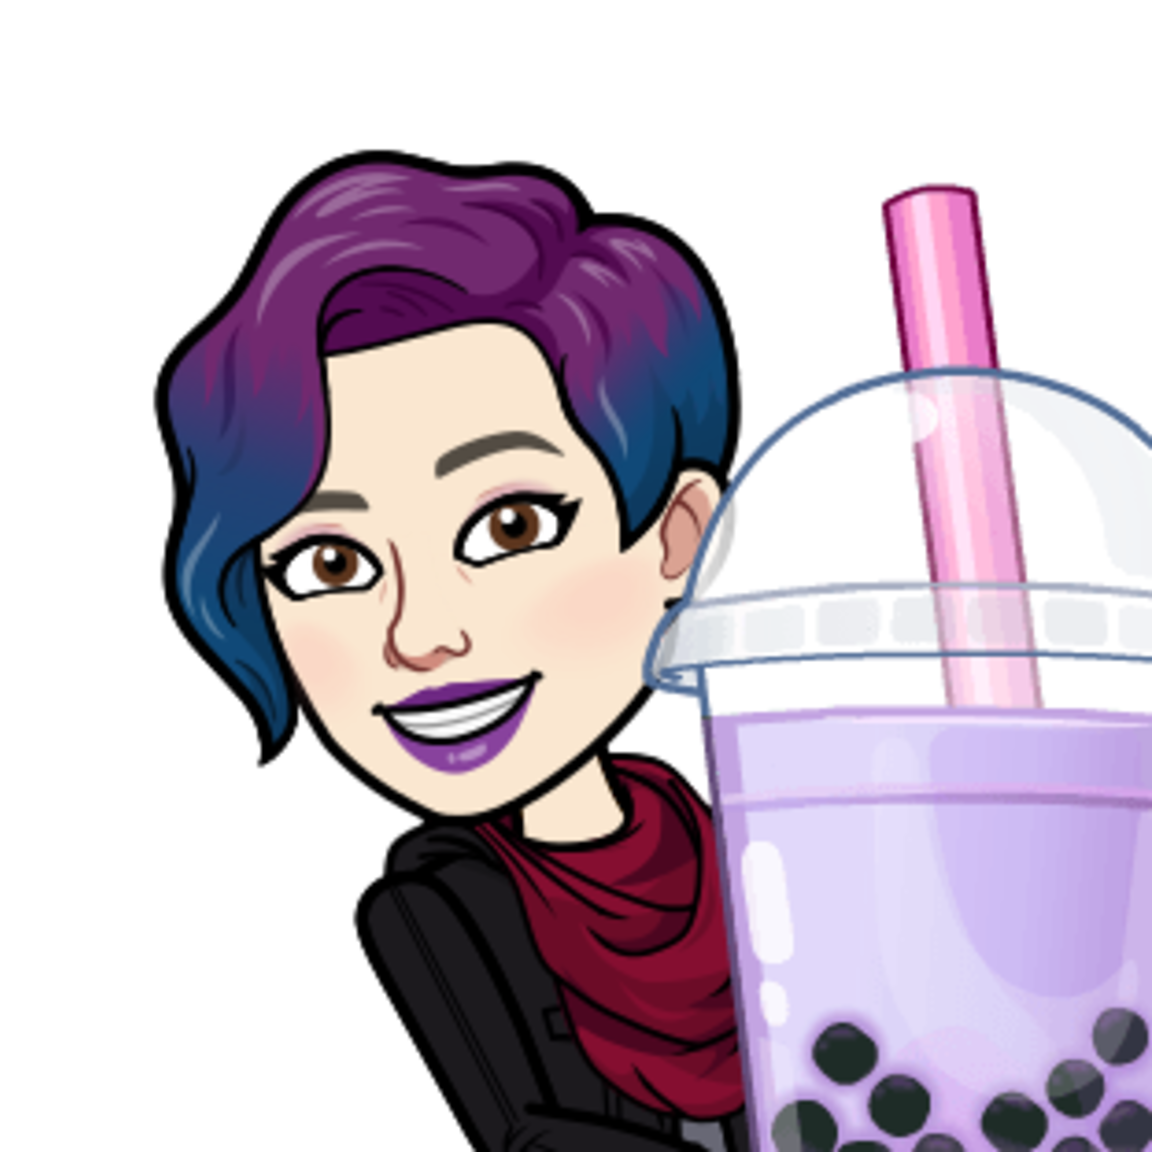 Christa Dickson's Bitmoji, which has purple and blue hair and is holding a glass of purple bubble tea